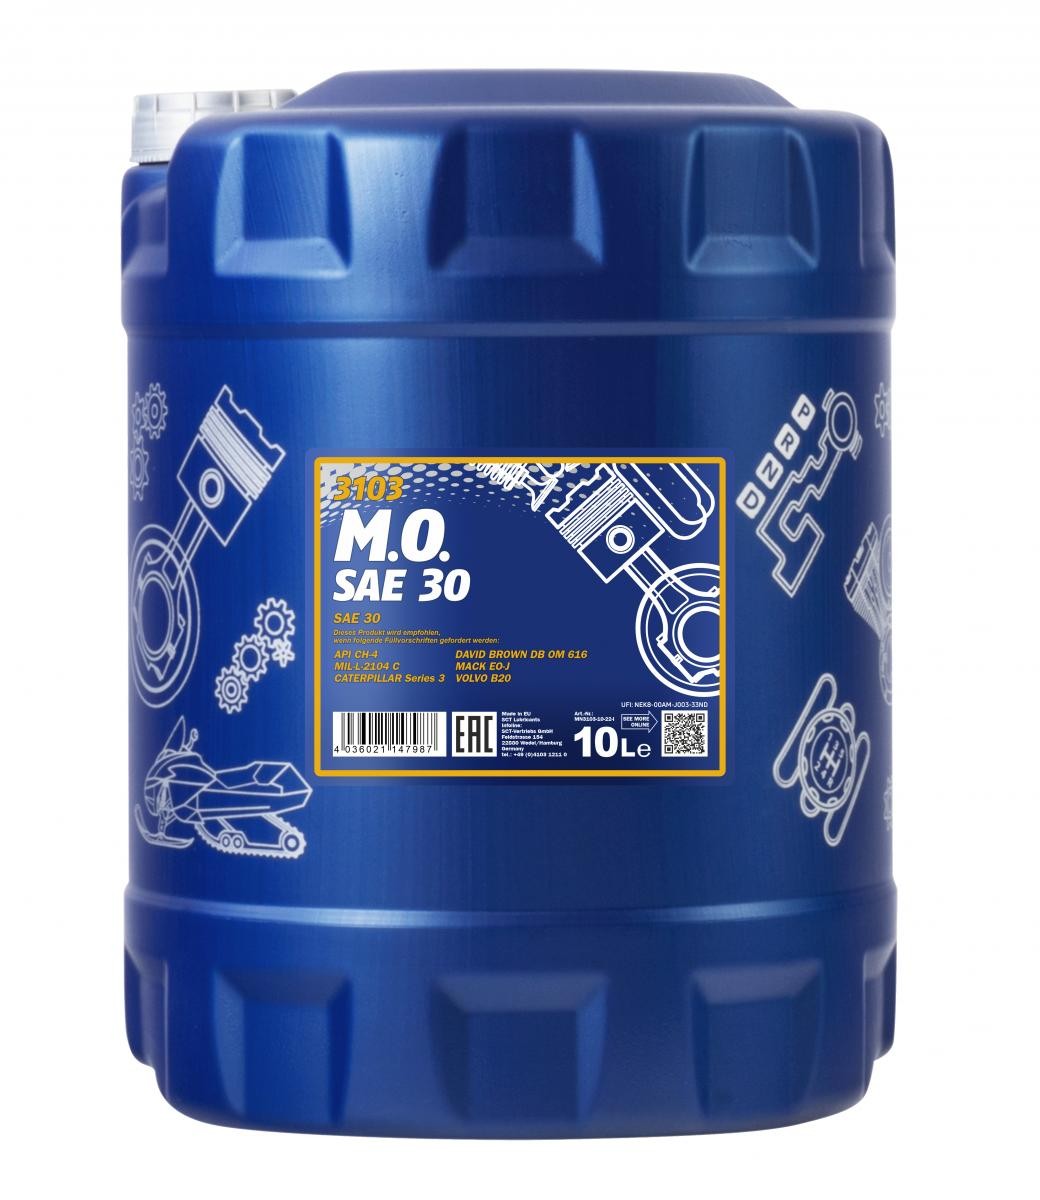 MANNOL M.O. SAE 30 MN310310 Multi-function Oil Canister